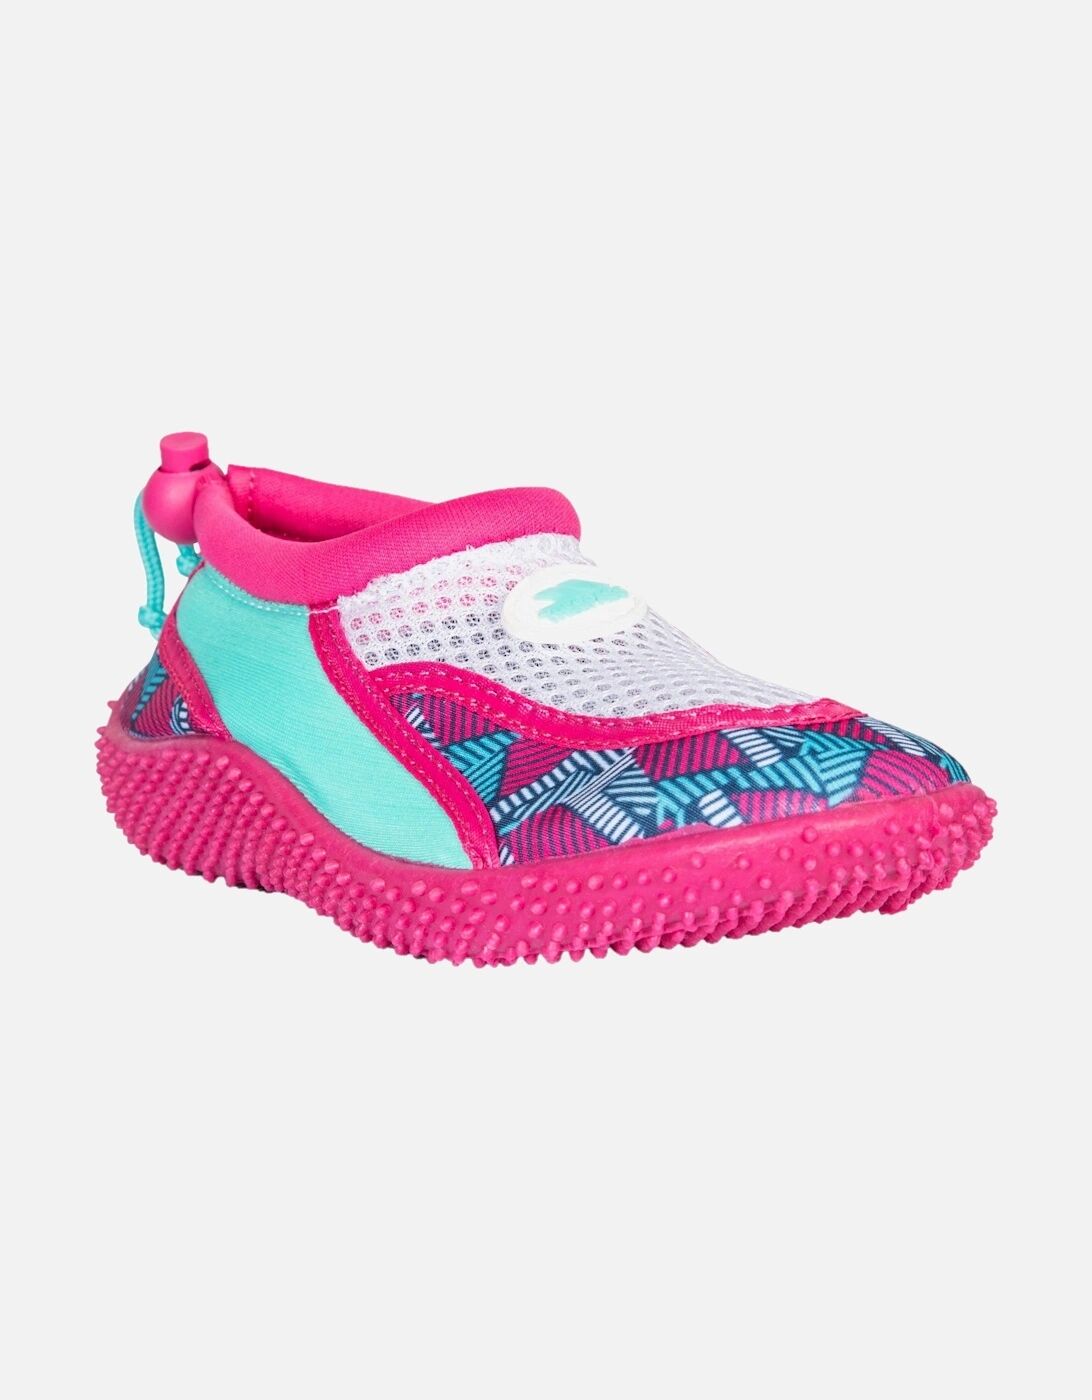 Girl's Trespass Childrens Girls Squidette Aqua Shoes - Pink Lady Print - Size: 1 youth uk